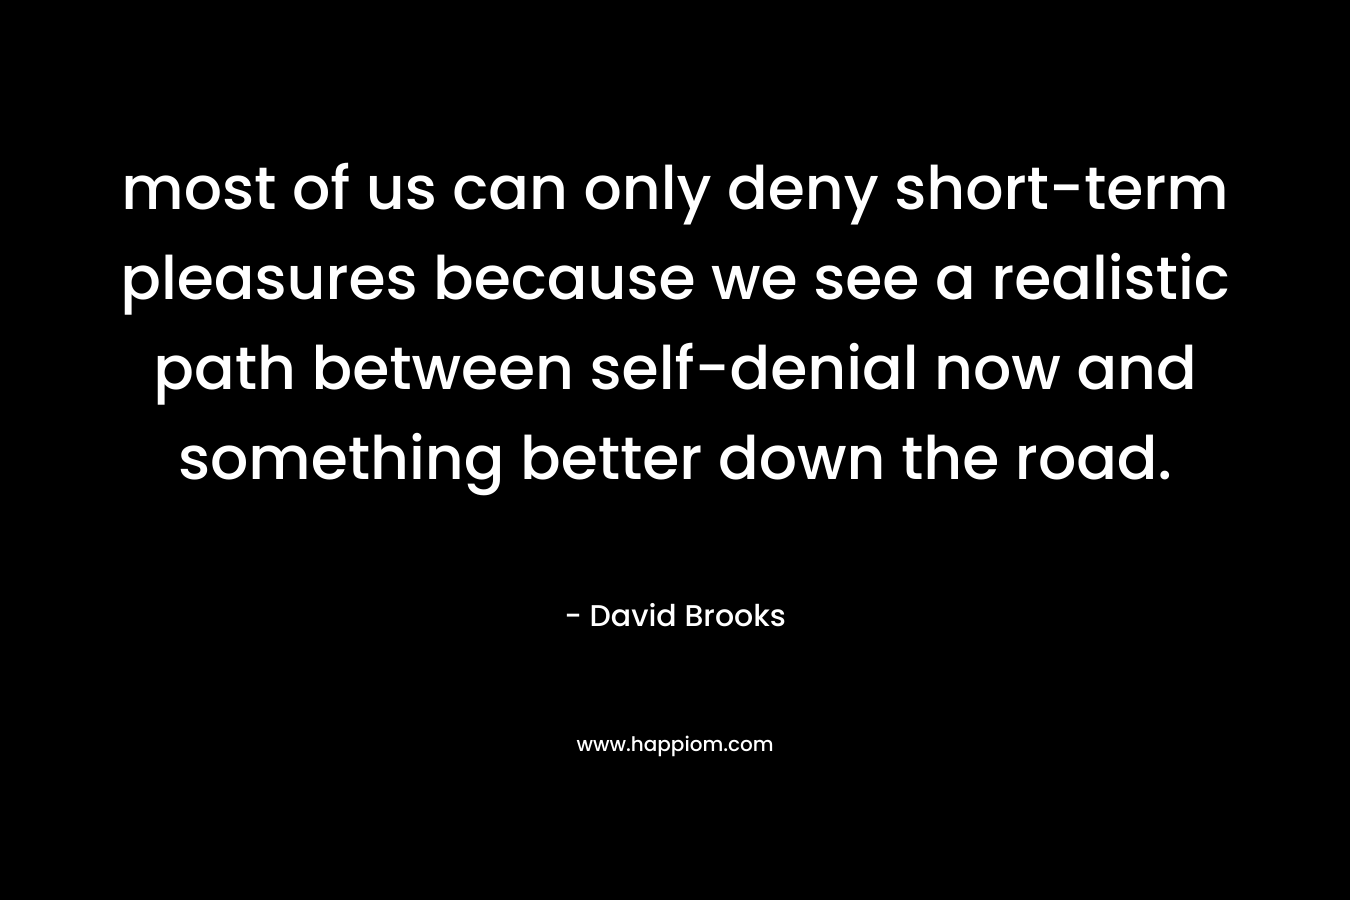 most of us can only deny short-term pleasures because we see a realistic path between self-denial now and something better down the road. – David Brooks